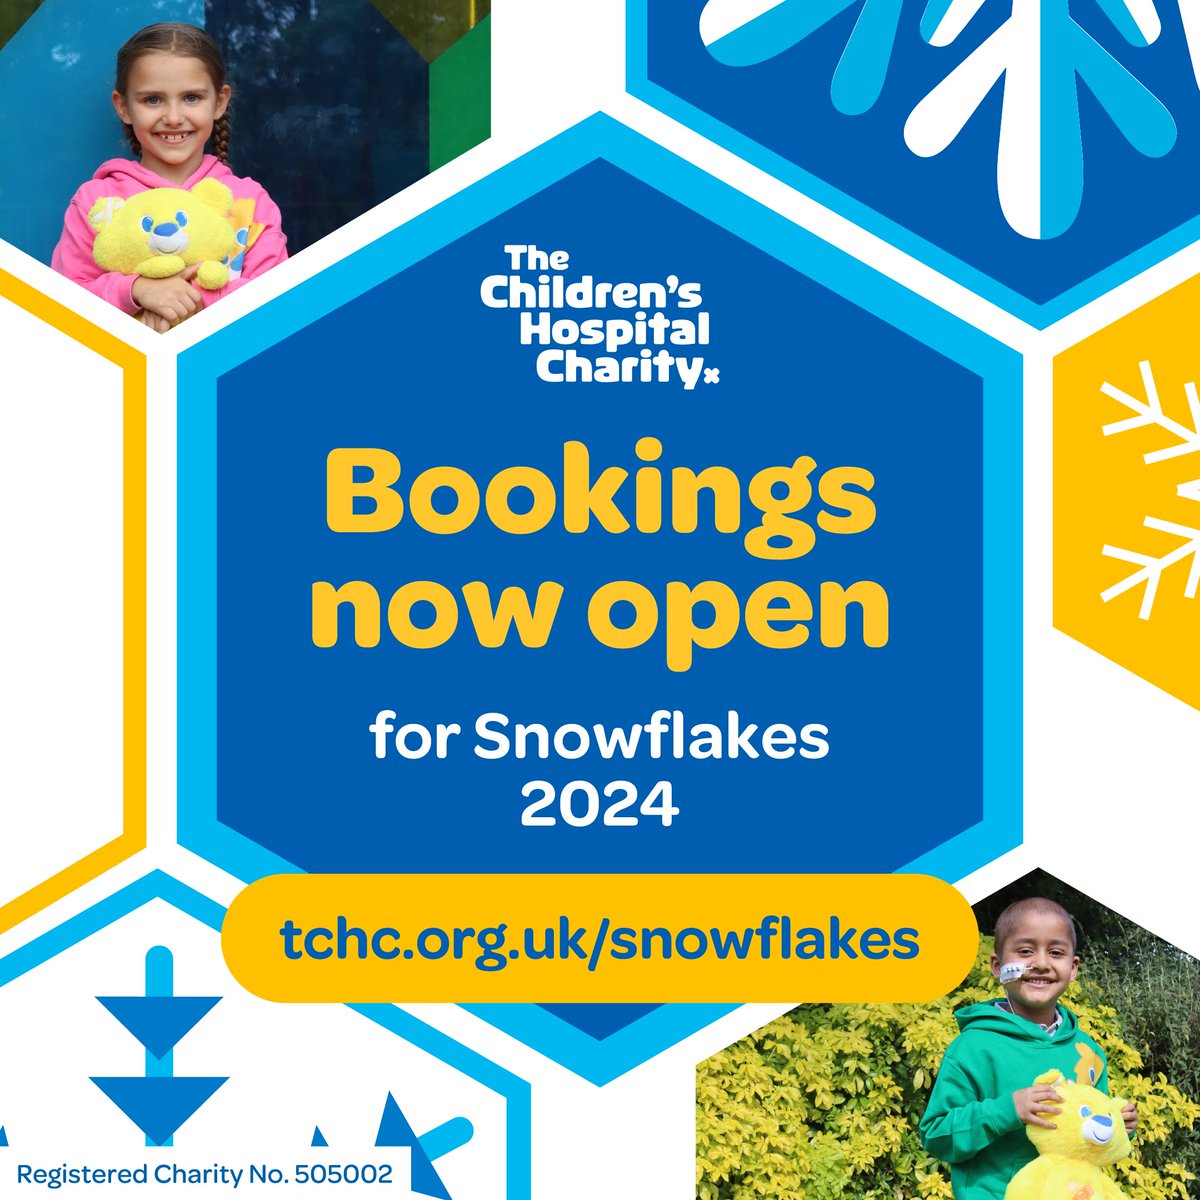 Did you know this year is our 20th anniversary since our snowflakes first shone? We've loved lighting up Sheffield and the surrounding areas for so long, all made possible by the kindness of our amazing charity supporters💙 Book your snowflake today at tchc.org.uk/snowflakes.